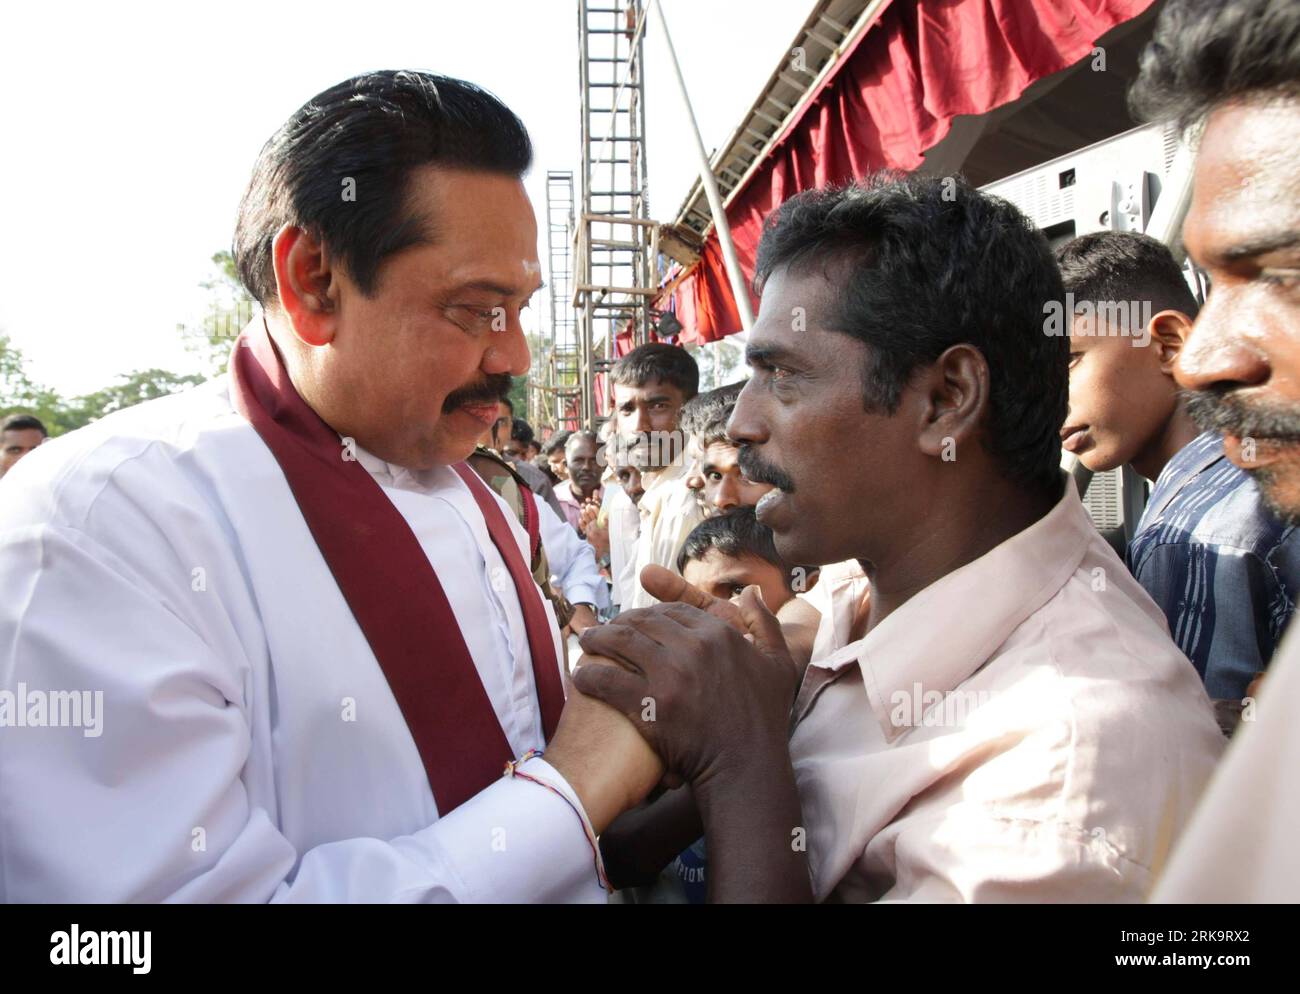 Bildnummer: 54227713  Datum: 14.07.2010  Copyright: imago/Xinhua (100714) -- KILINOCHCHI, July 14, 2010 (Xinhua) -- Sri Lankan President Mahinda Rajapaksa talks with residents in the north district of Kilinochchi, Sri Lanka, July 14, 2010. Rajapaksa visited some areas of the district on Wednesday after chairing the first ever meeting of the cabinet of ministers held at Kilinochchi, the former administrative capital of the Liberation Tigers of Tamil Eelam (LTTE). The government said the Kilinochchi cabinet meeting demonstrated the government s readiness to take the development to former battle Stock Photo